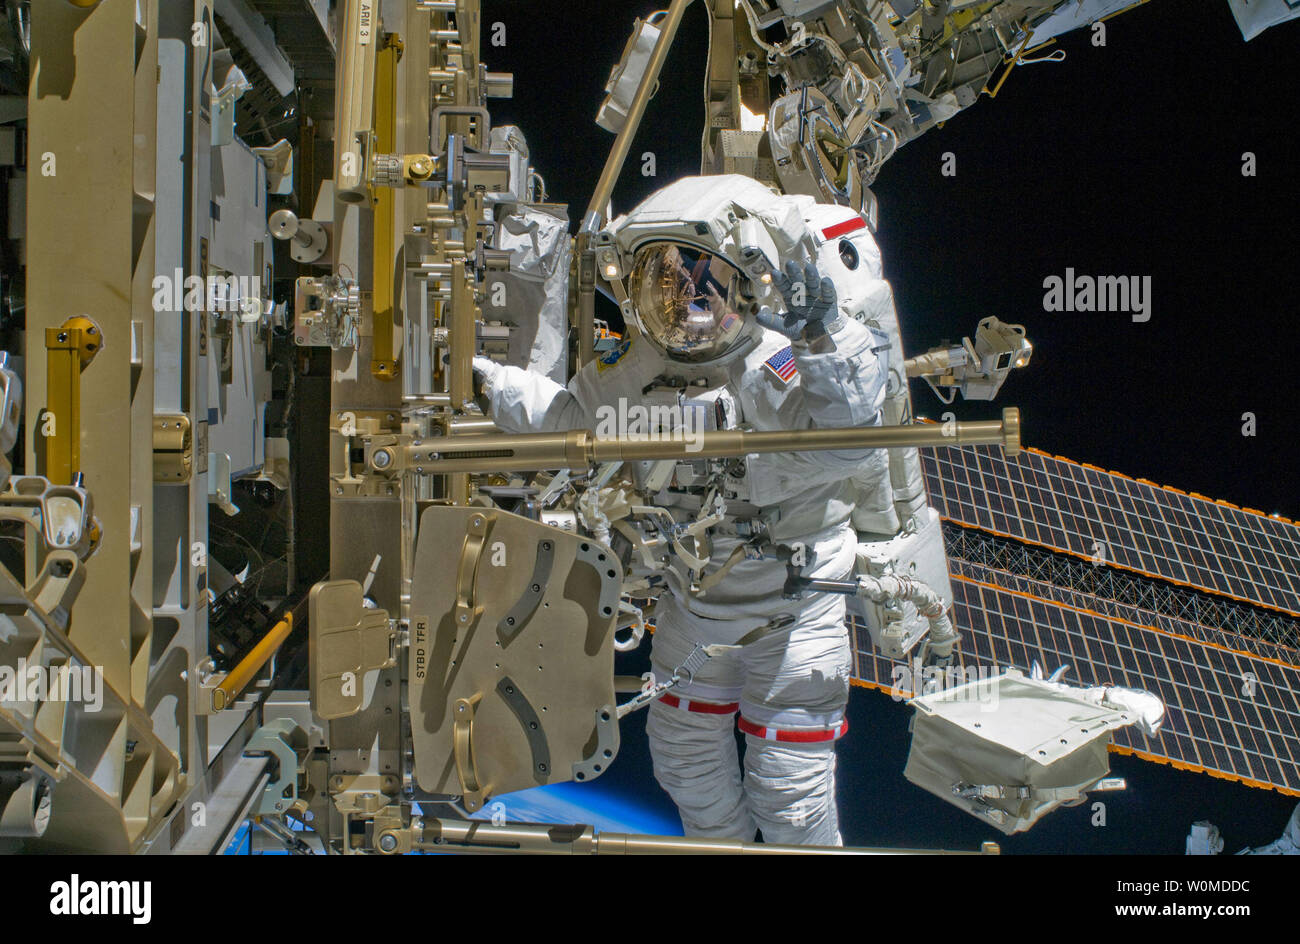 In this November 20, 2008 NASA image Astronaut Shane Kimbrough, STS-126 mission specialists, participates in the mission's second scheduled session of extravehicular activity (EVA) as construction and maintenance continue on the International Space Station. During the six-hour, 45-minute spacewalk, Piper and Kimbrough continued the process of removing debris and applying lubrication around the starboard Solar Alpha Rotary Joint (SARJ), replaced four more of the SARJ's 12 trundle bearing assemblies, relocated two equipment carts and applied lubrication to the station's robotic Canadarm2. (UPI P Stock Photo